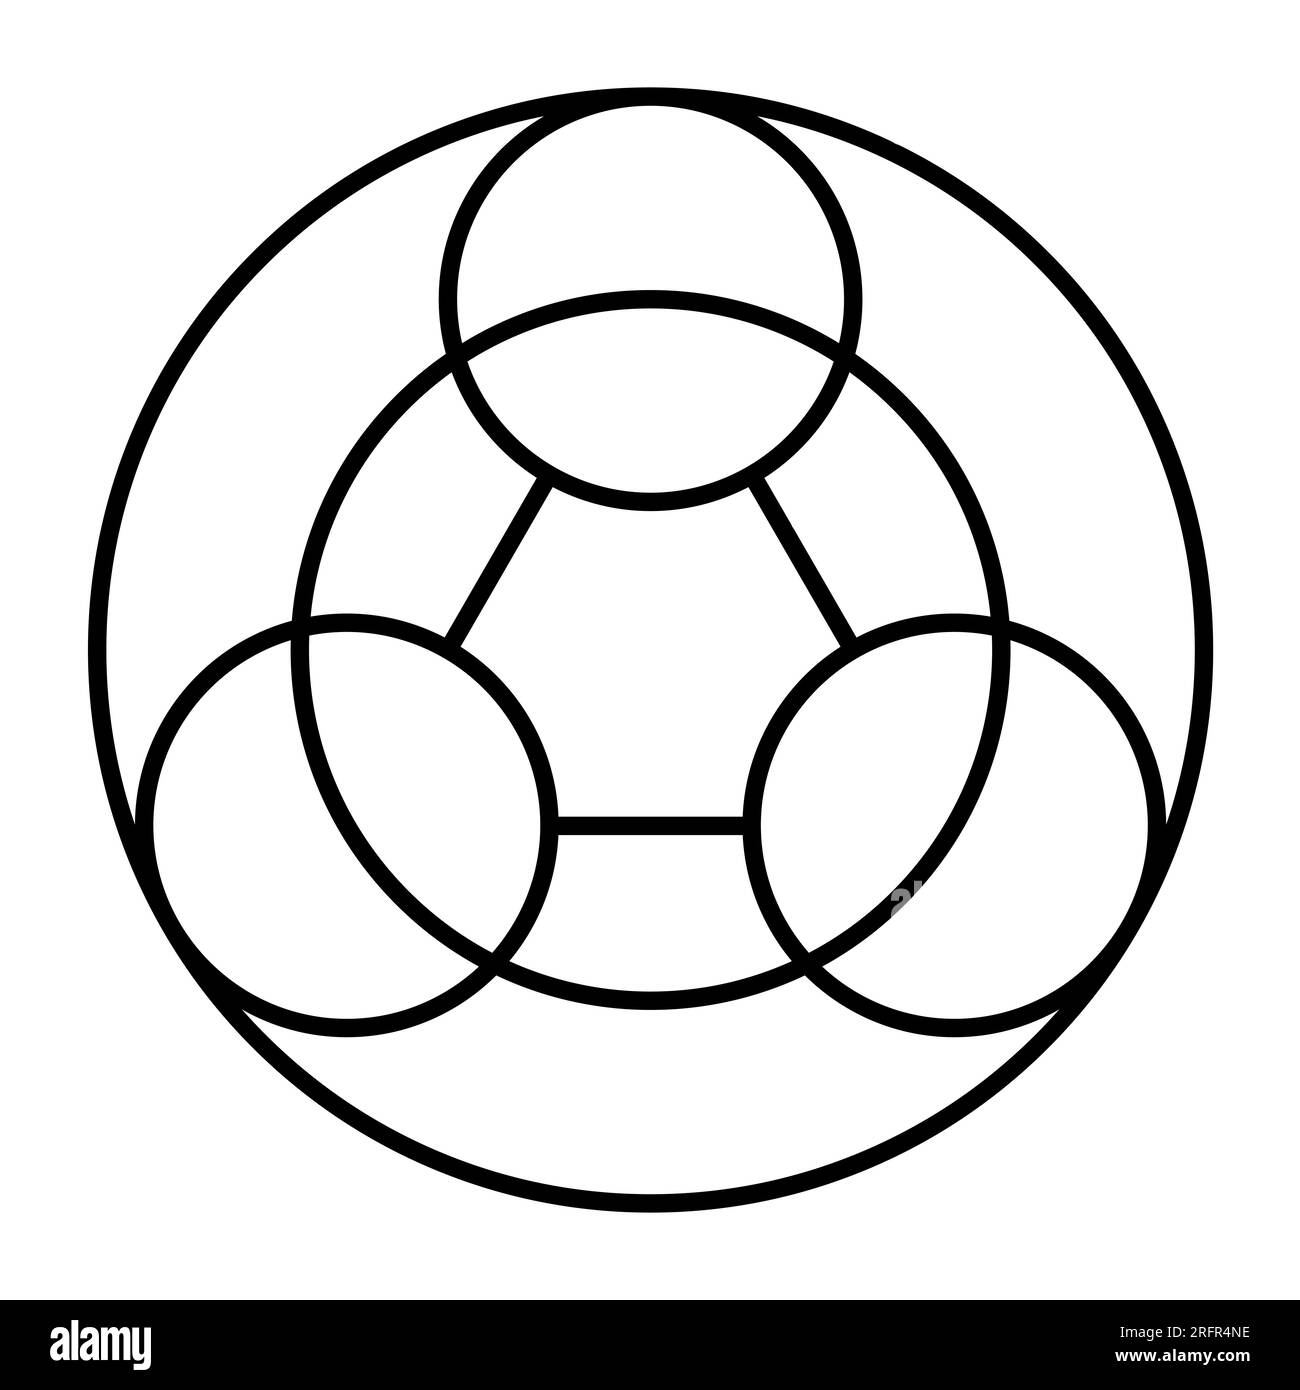 Trigram, symbol made of 3 circles, and a circle passing through their centers, with an implied equilateral triangle, surrounded by a big circle. Stock Photo